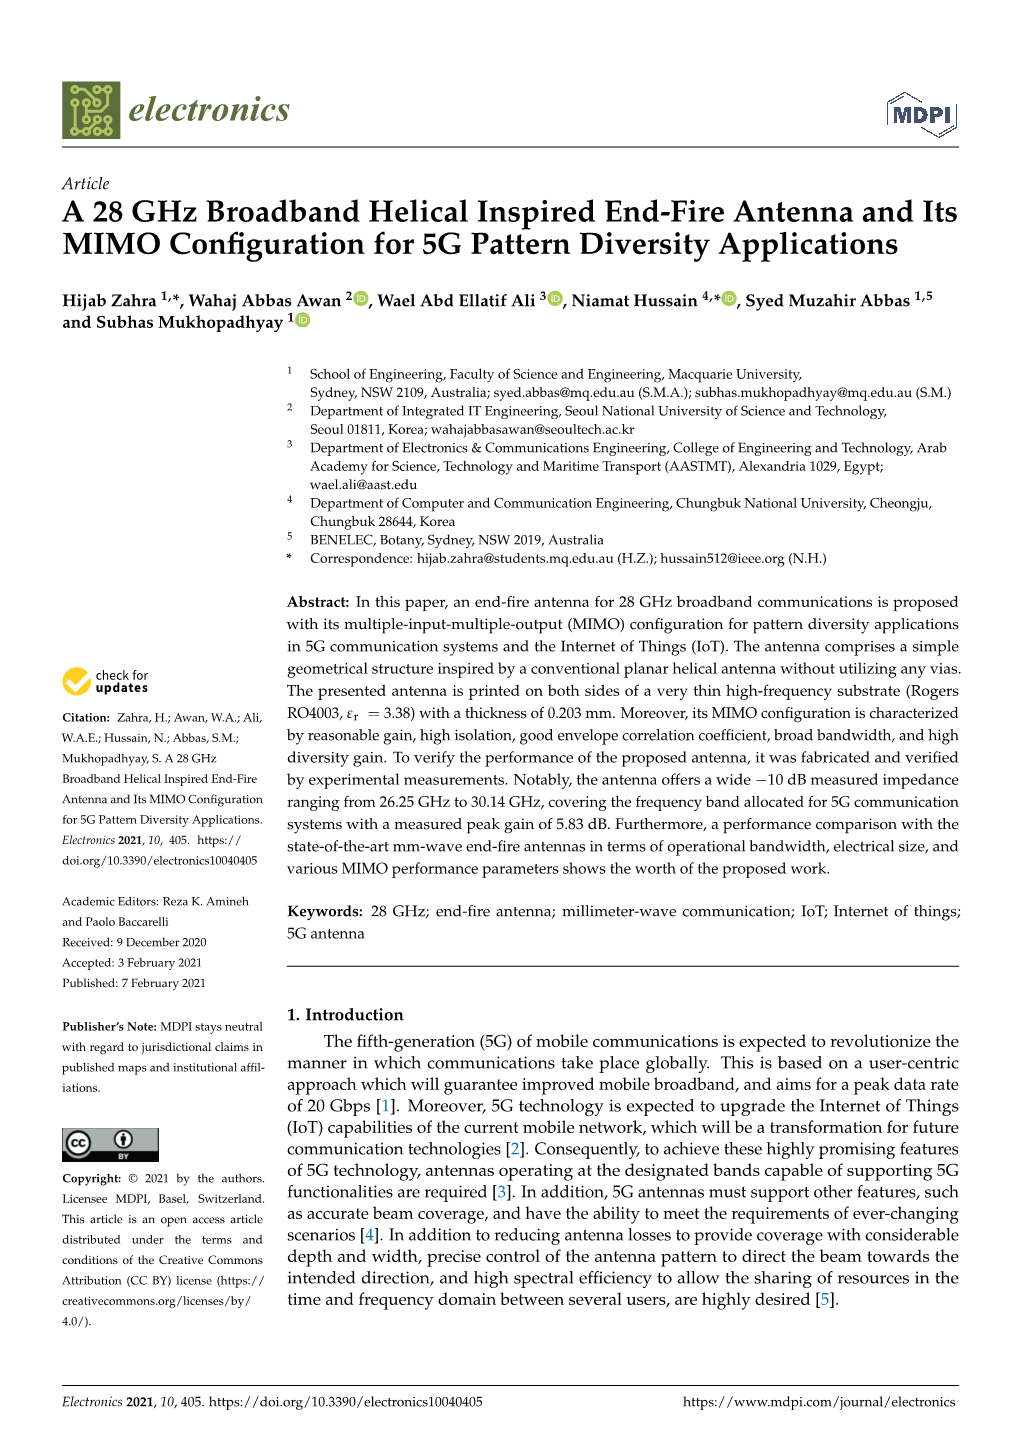 A 28 Ghz Broadband Helical Inspired End-Fire Antenna and Its MIMO Conﬁguration for 5G Pattern Diversity Applications